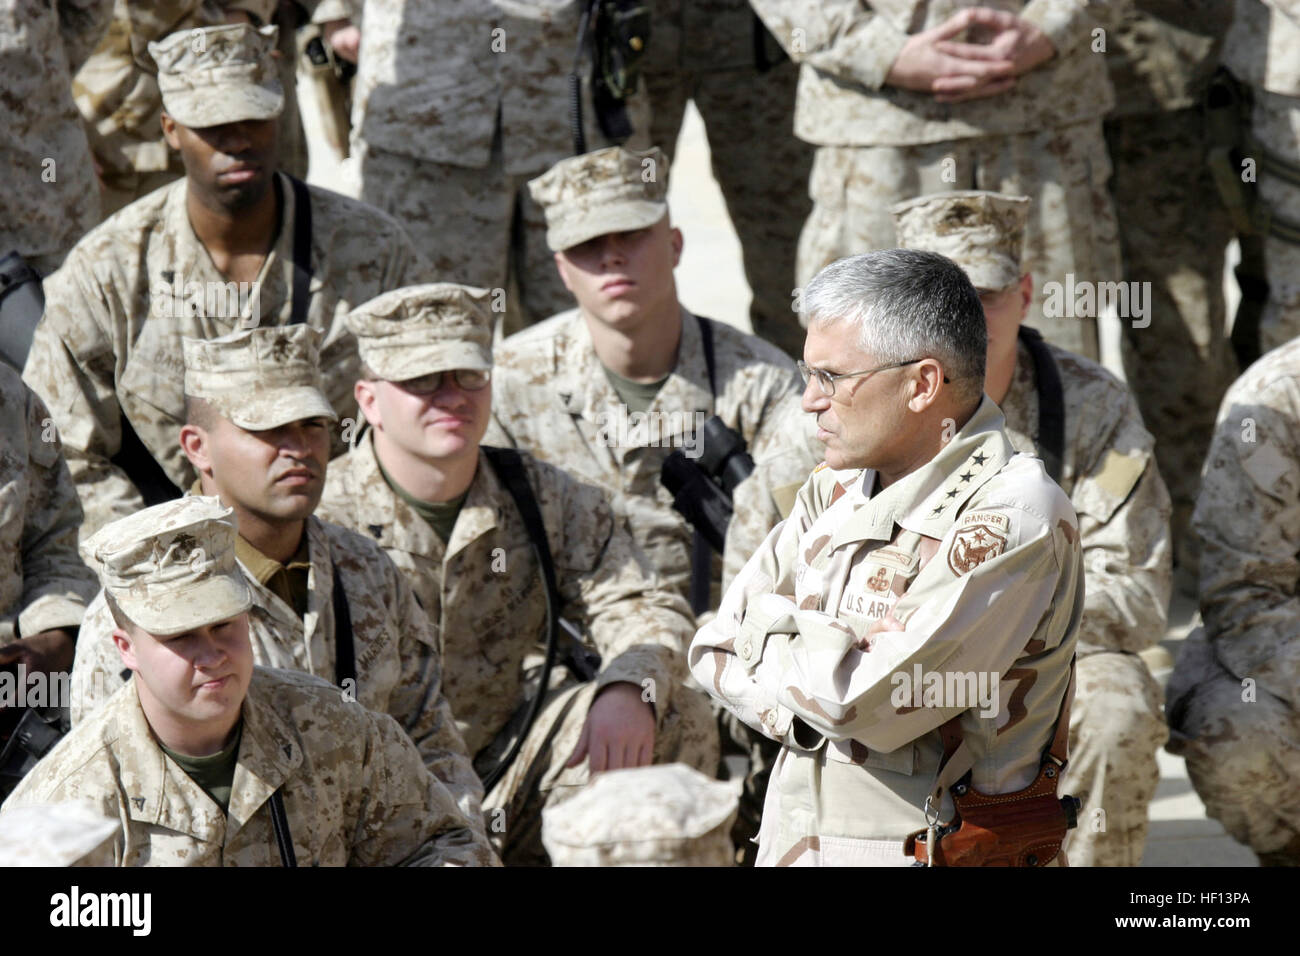 060211-M-7772K-004 AL Asad, Iraq (Feb. 11, 2006) - Multi-National Forces Commander, U.S. Army Gen. George Casey, speaks with Marines from Regimental Combat Team 2 about their achievements made during Operation Iraqi Freedom. In support of Operation Iraqi Freedom, 2nd Marine Division is deployed to conduct counter-insurgency operations to isolate and neutralize anti-Iraqi forces; support the continued development of Iraqi Security Force; support Iraqi reconstruction and democratic elections and facilitate the creation of a secure environment that enables Iraqi self-reliance and self-governance. Stock Photo